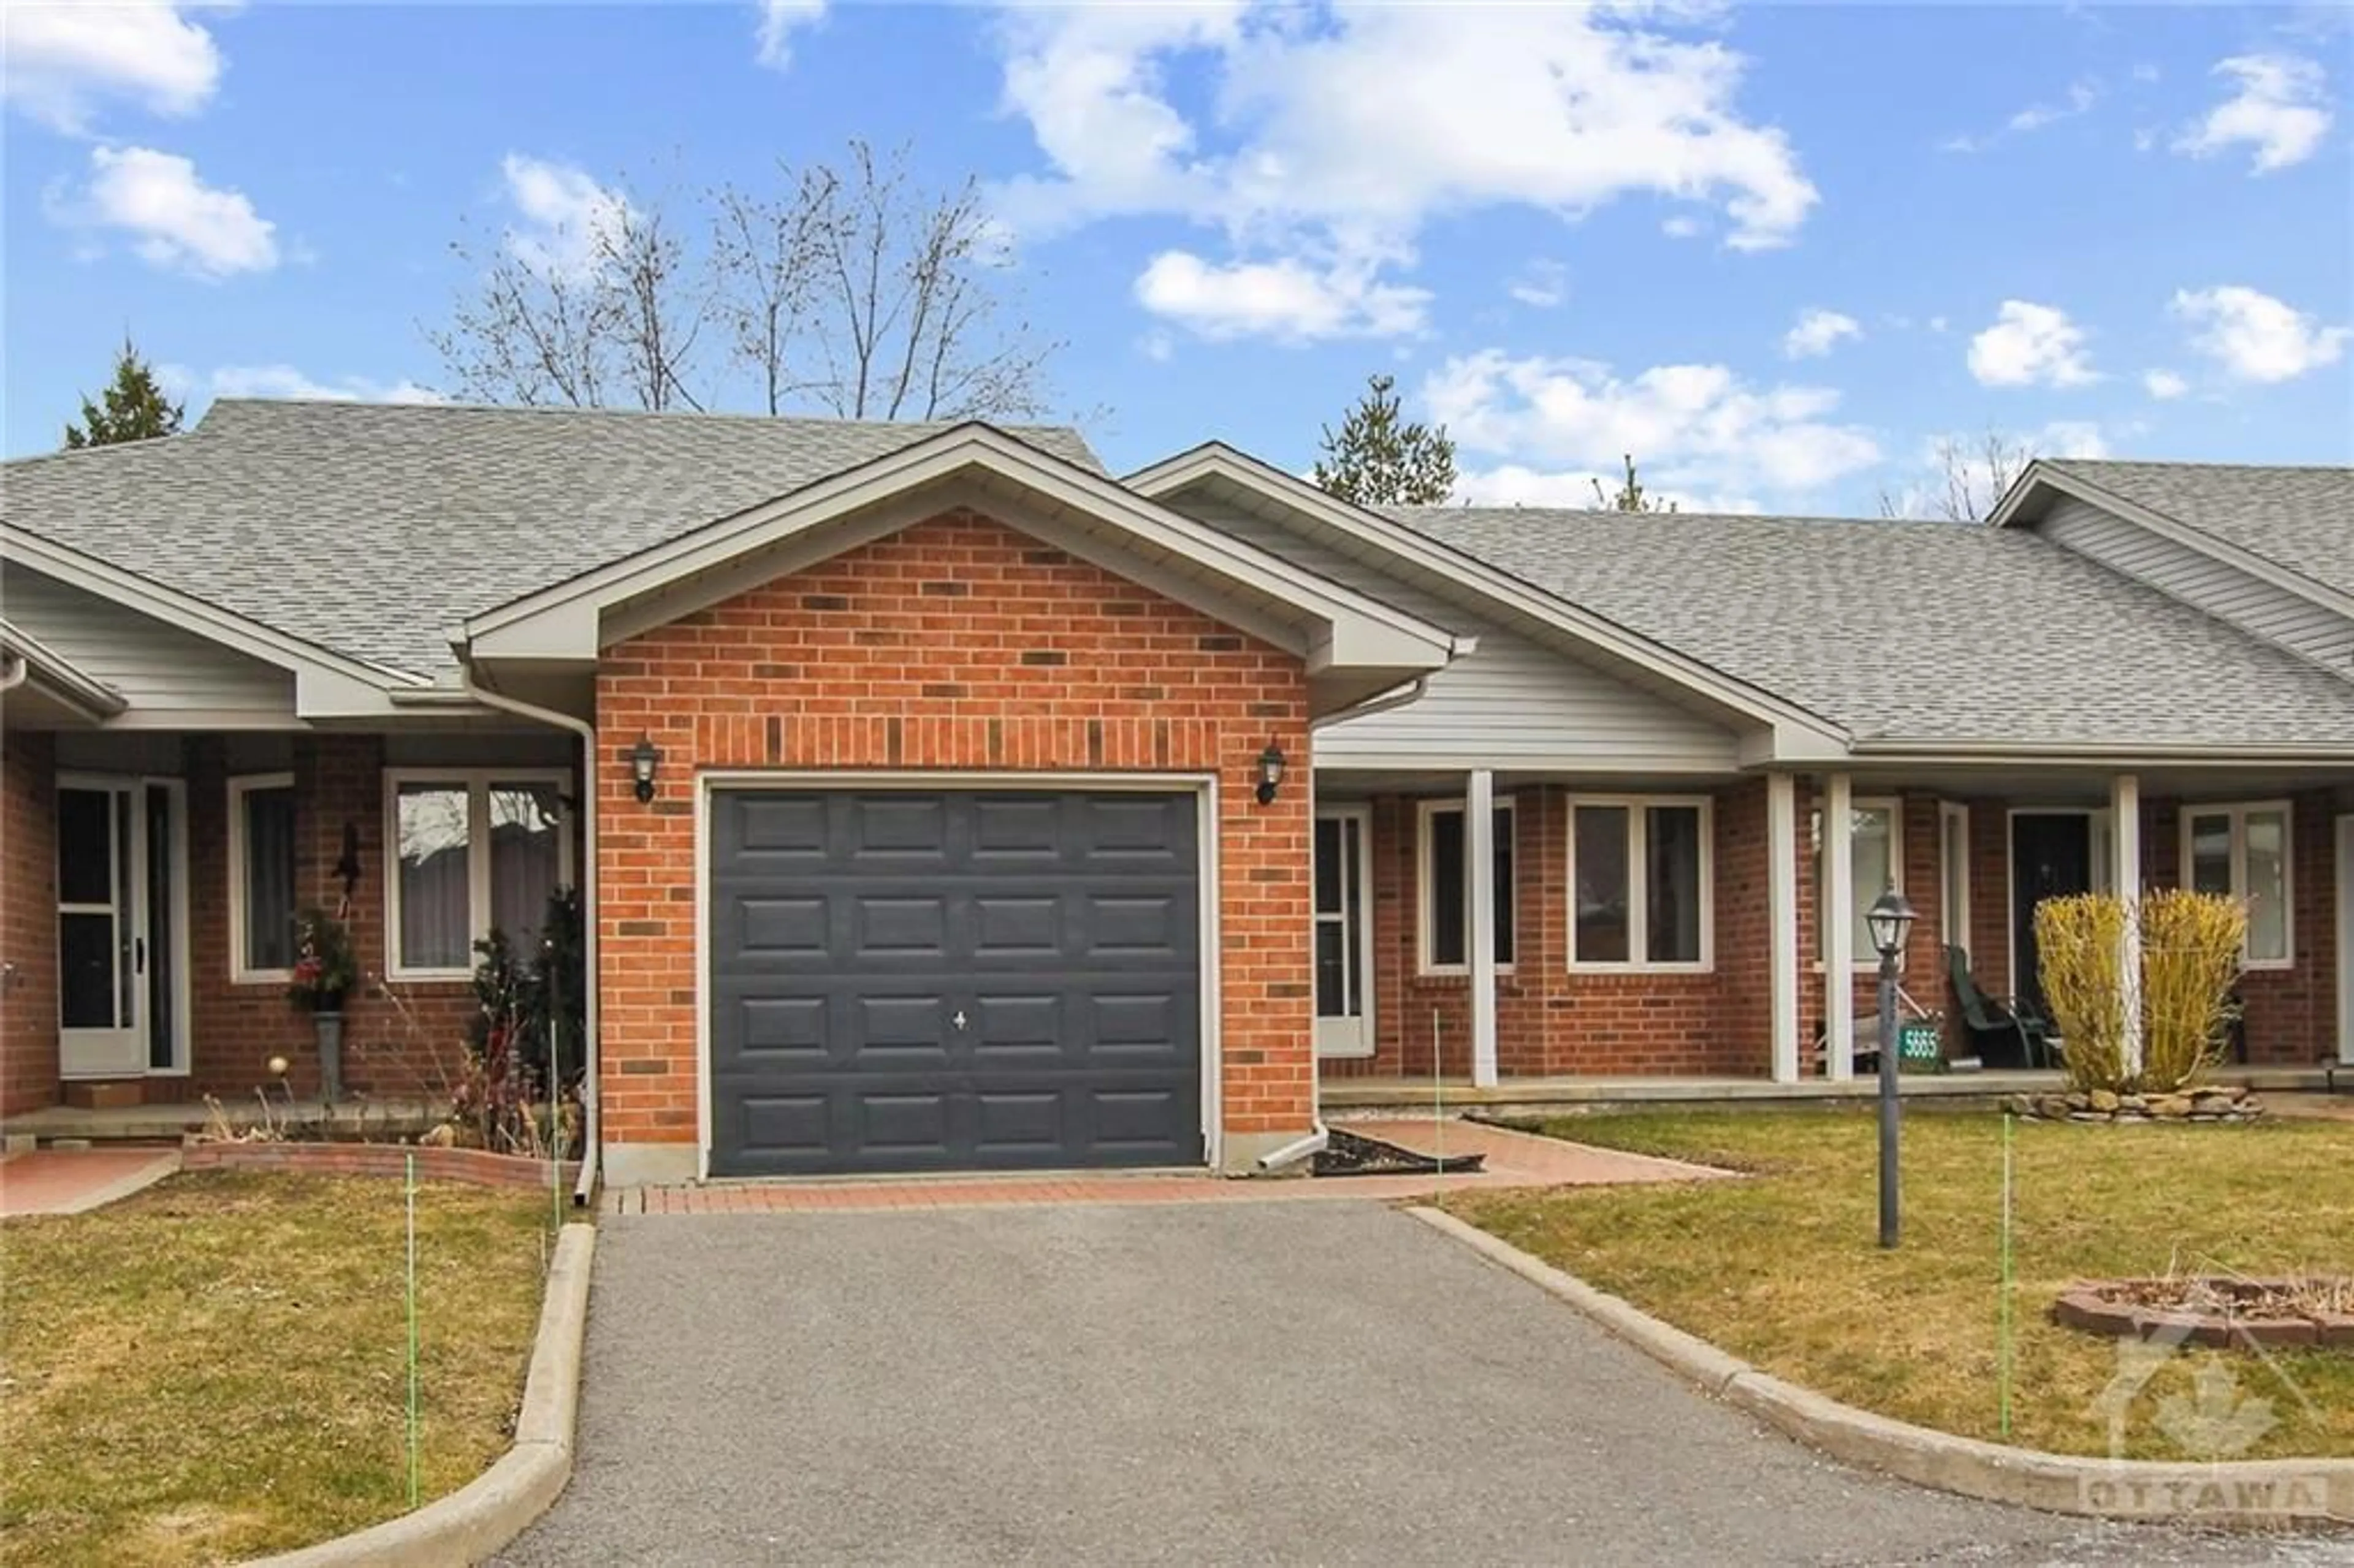 Home with brick exterior material for 5665 MAHOGANY HARBOUR Lane, Ottawa Ontario K4M 1K9